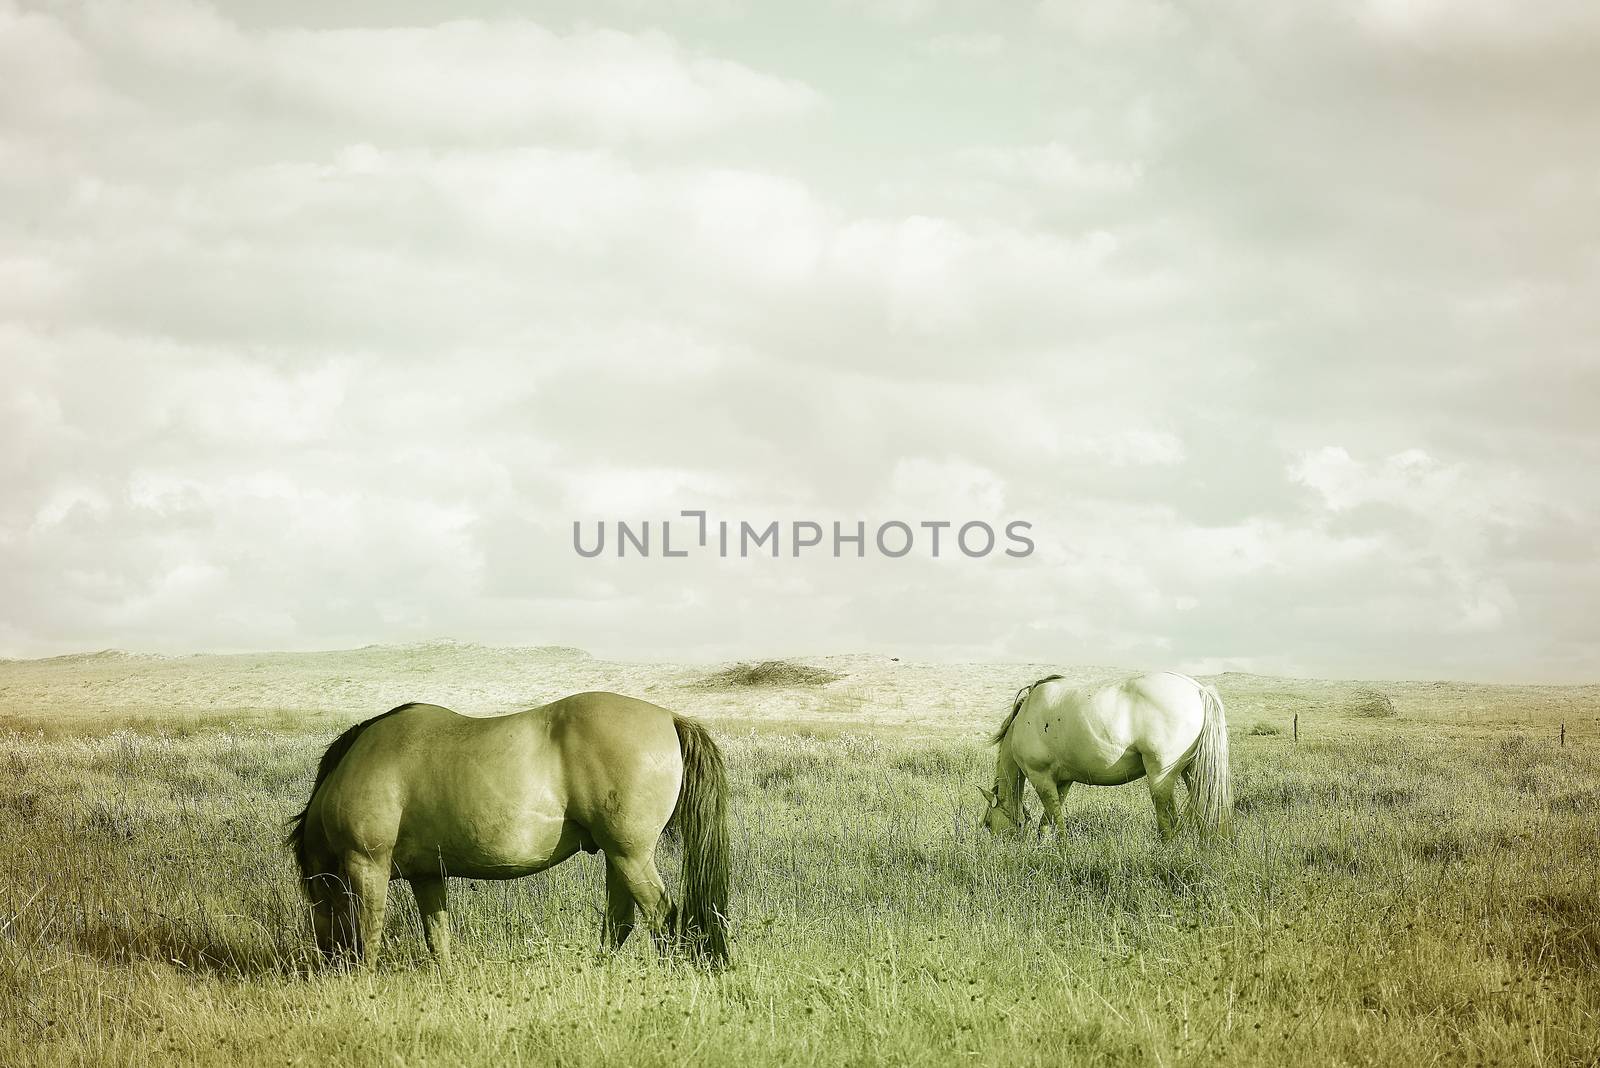 Countryside landscape with grazing horses on pasture under cloudy sky. Soft warm colors vintage effect photography.